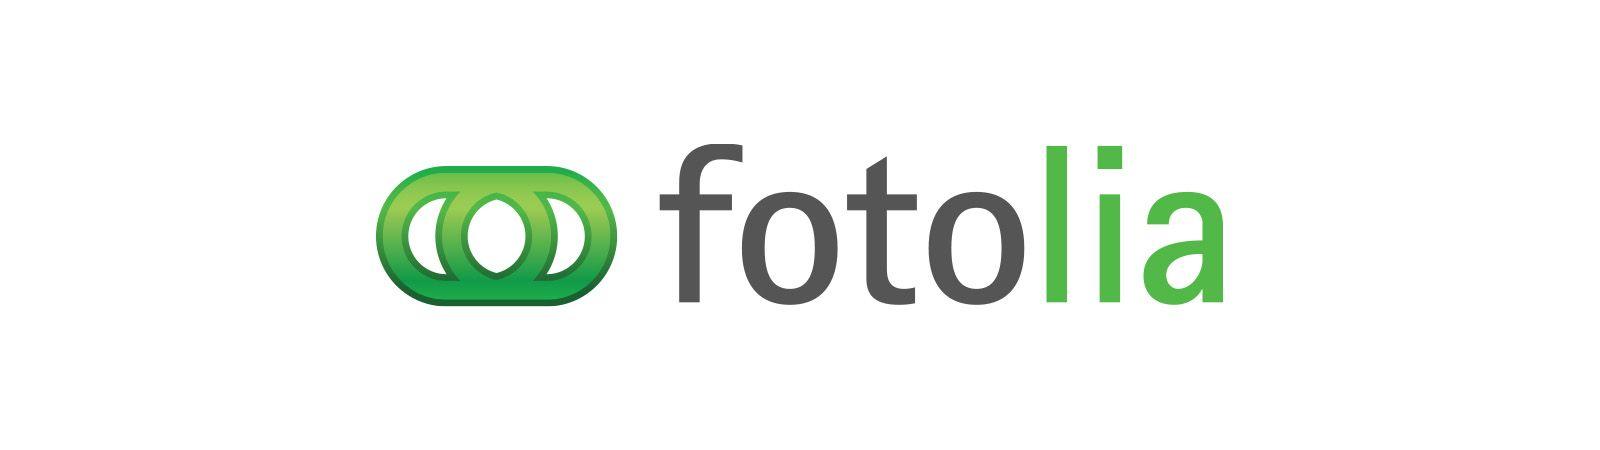 Fotolia Logo - Fotolia. Technology Sector. TA. A Private Equity Firm